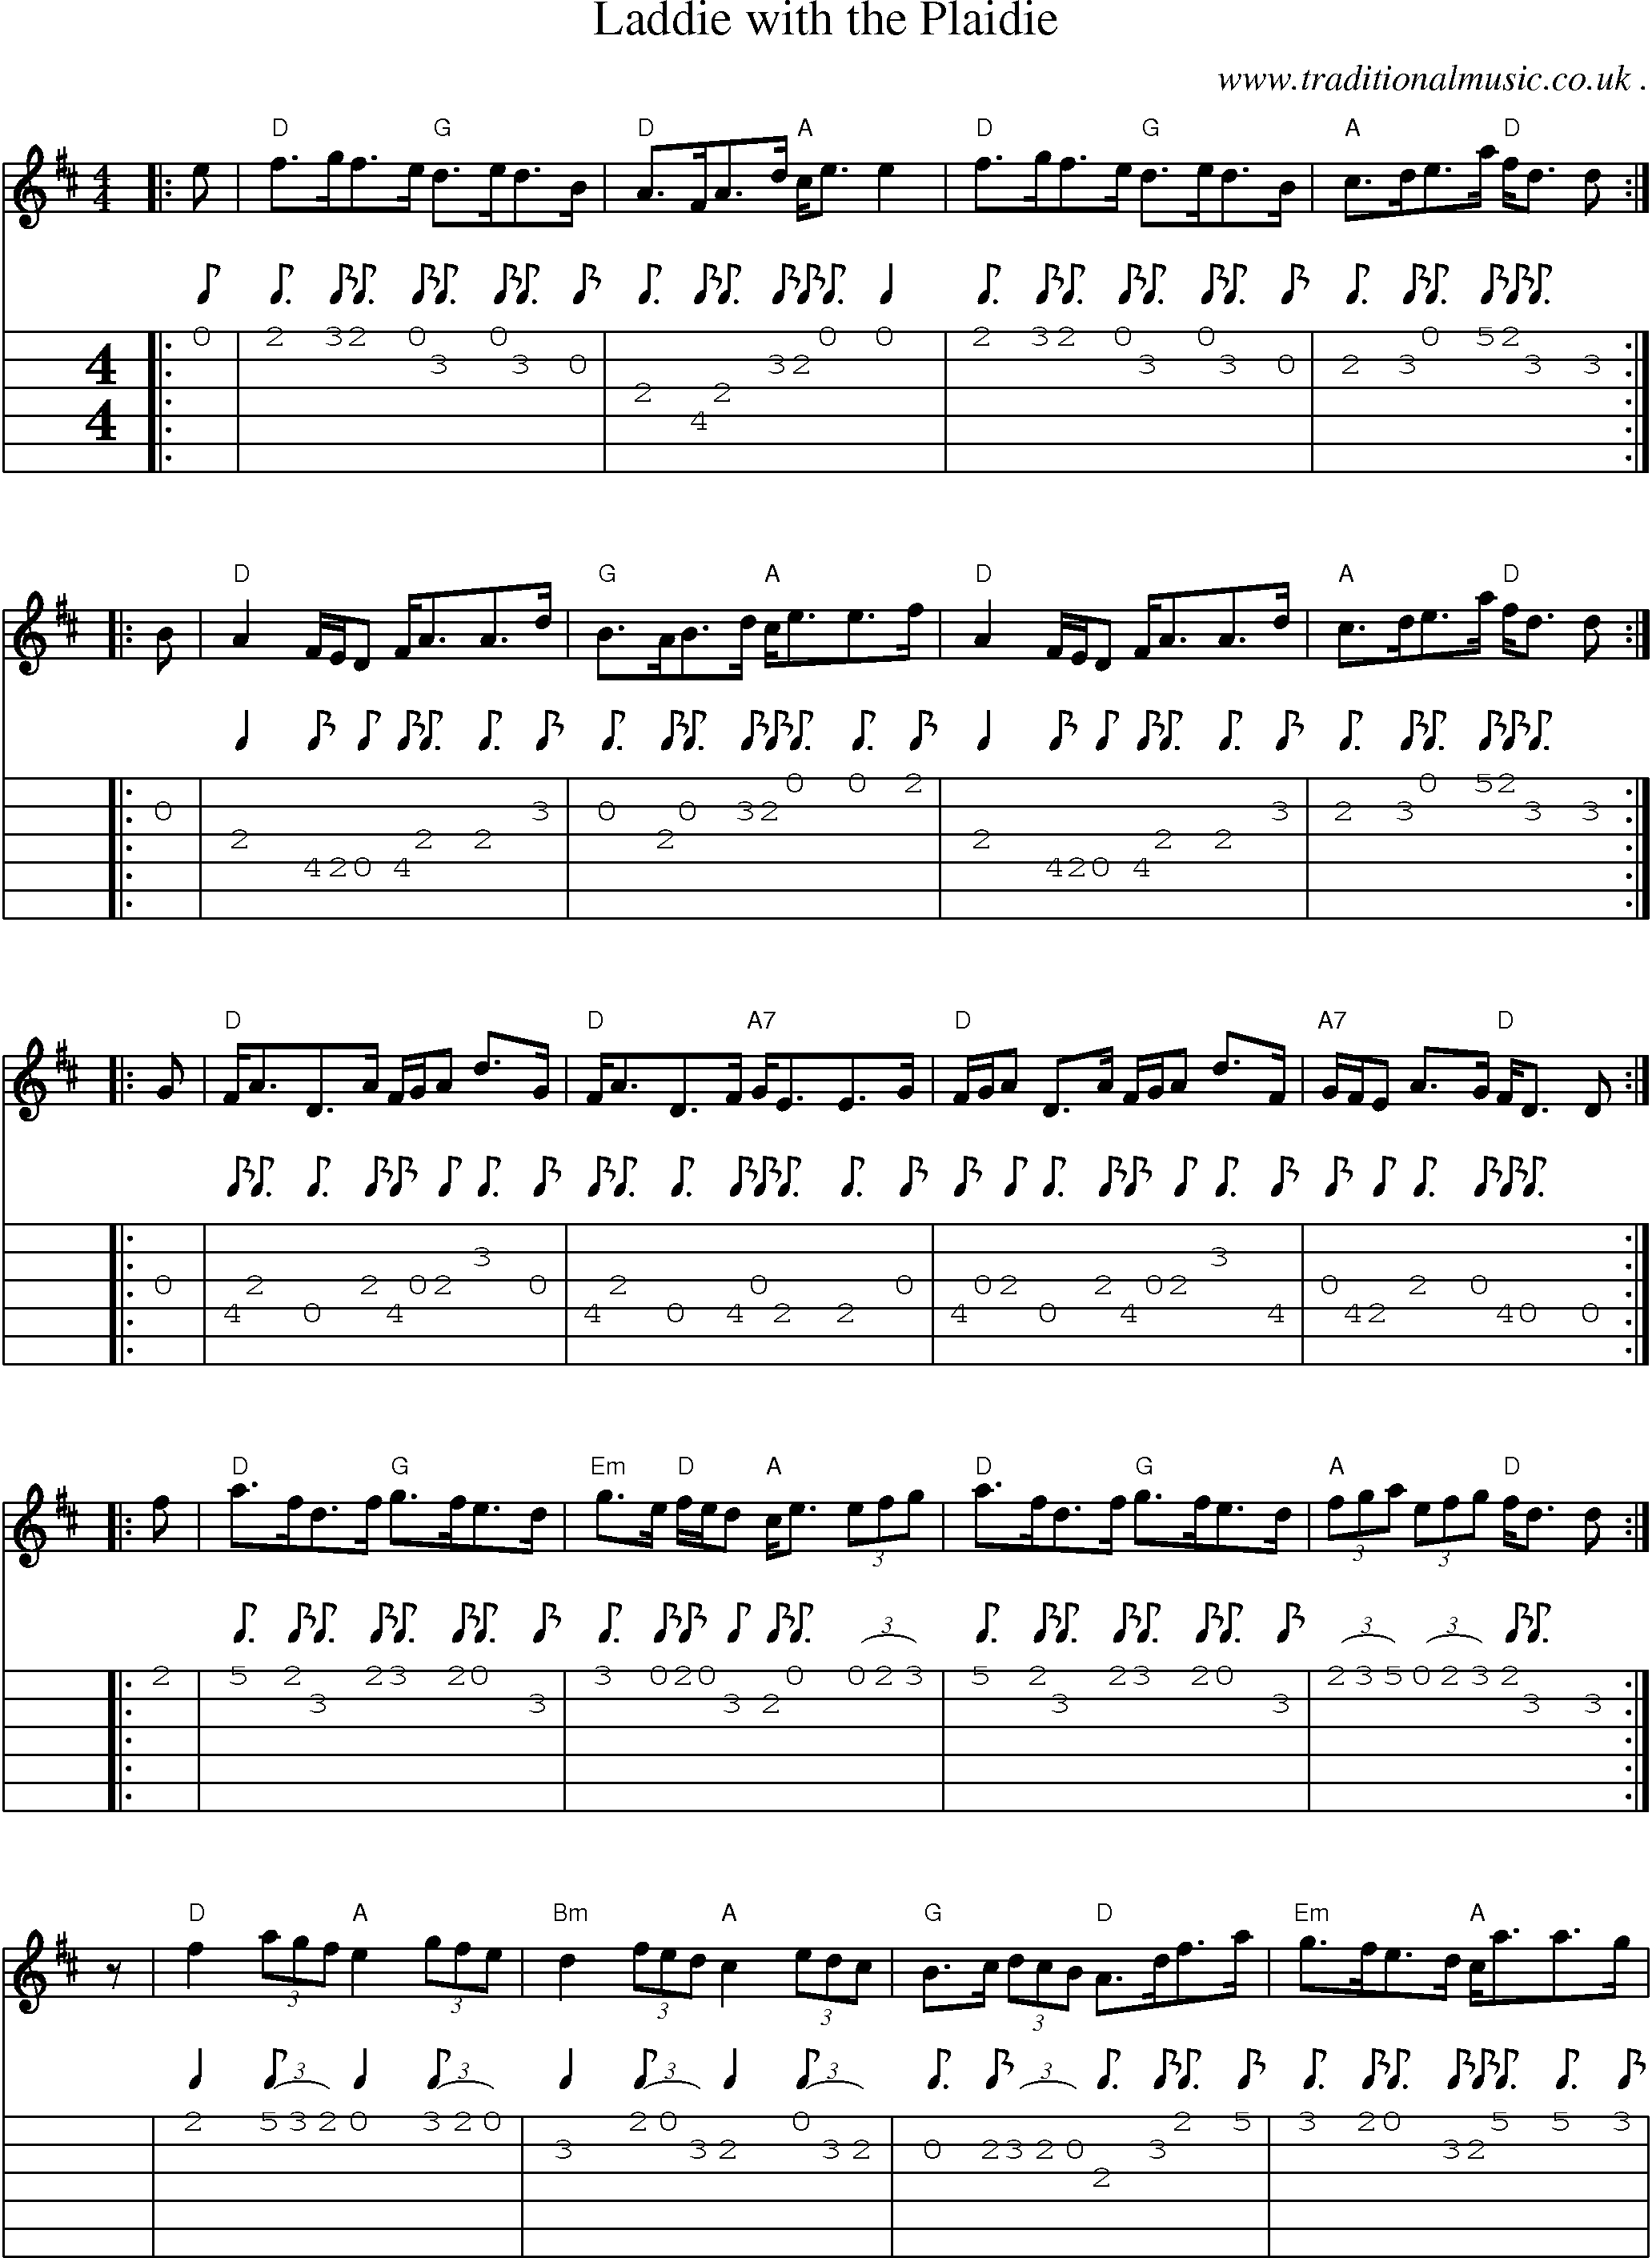 Sheet-music  score, Chords and Guitar Tabs for Laddie With The Plaidie